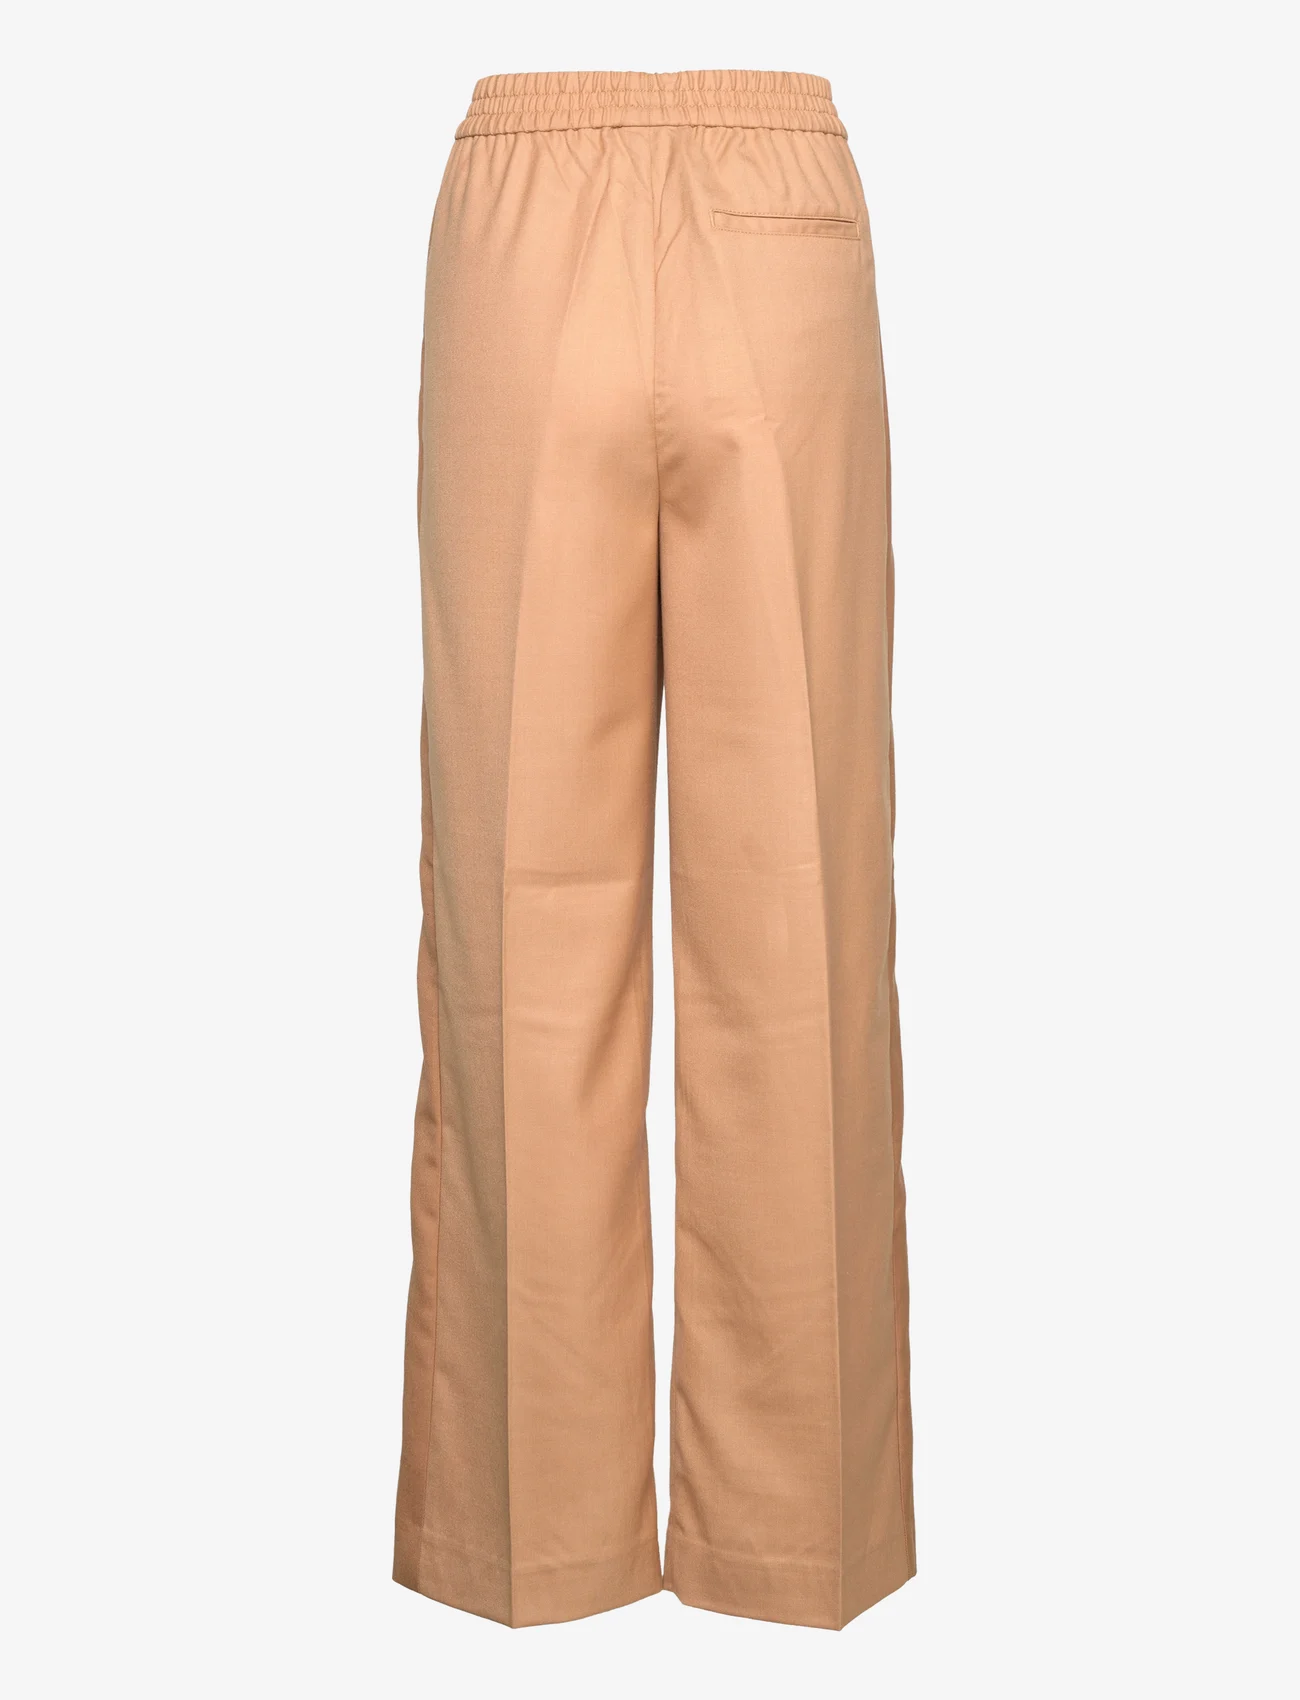 GANT - D1. STRAIGHT PULL ON PANTS - straight leg trousers - toffee beige - 1